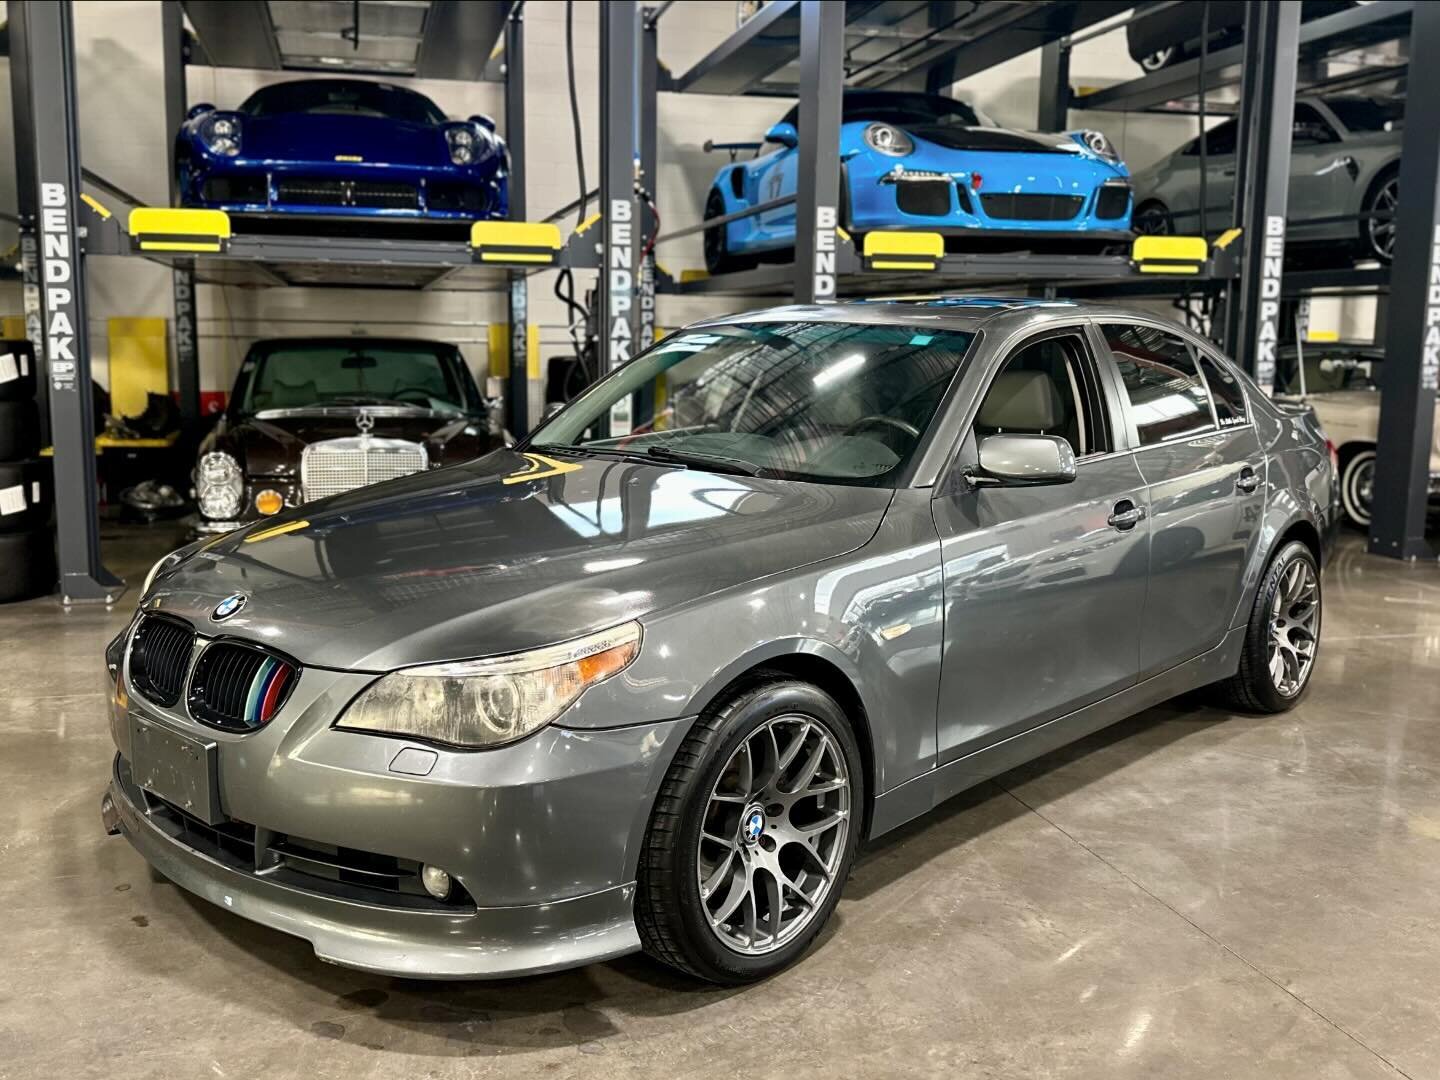 2006 BMW 530xi Sport. Manual. Sedan. 162k Miles. Recent services include: clutch and flywheel, axles, control arms, driveshaft center support bearing and more. Serviced and maintained by @littlespeedshop. $7999 OBO
#bmw #bmw530 #bmw530sport #manual